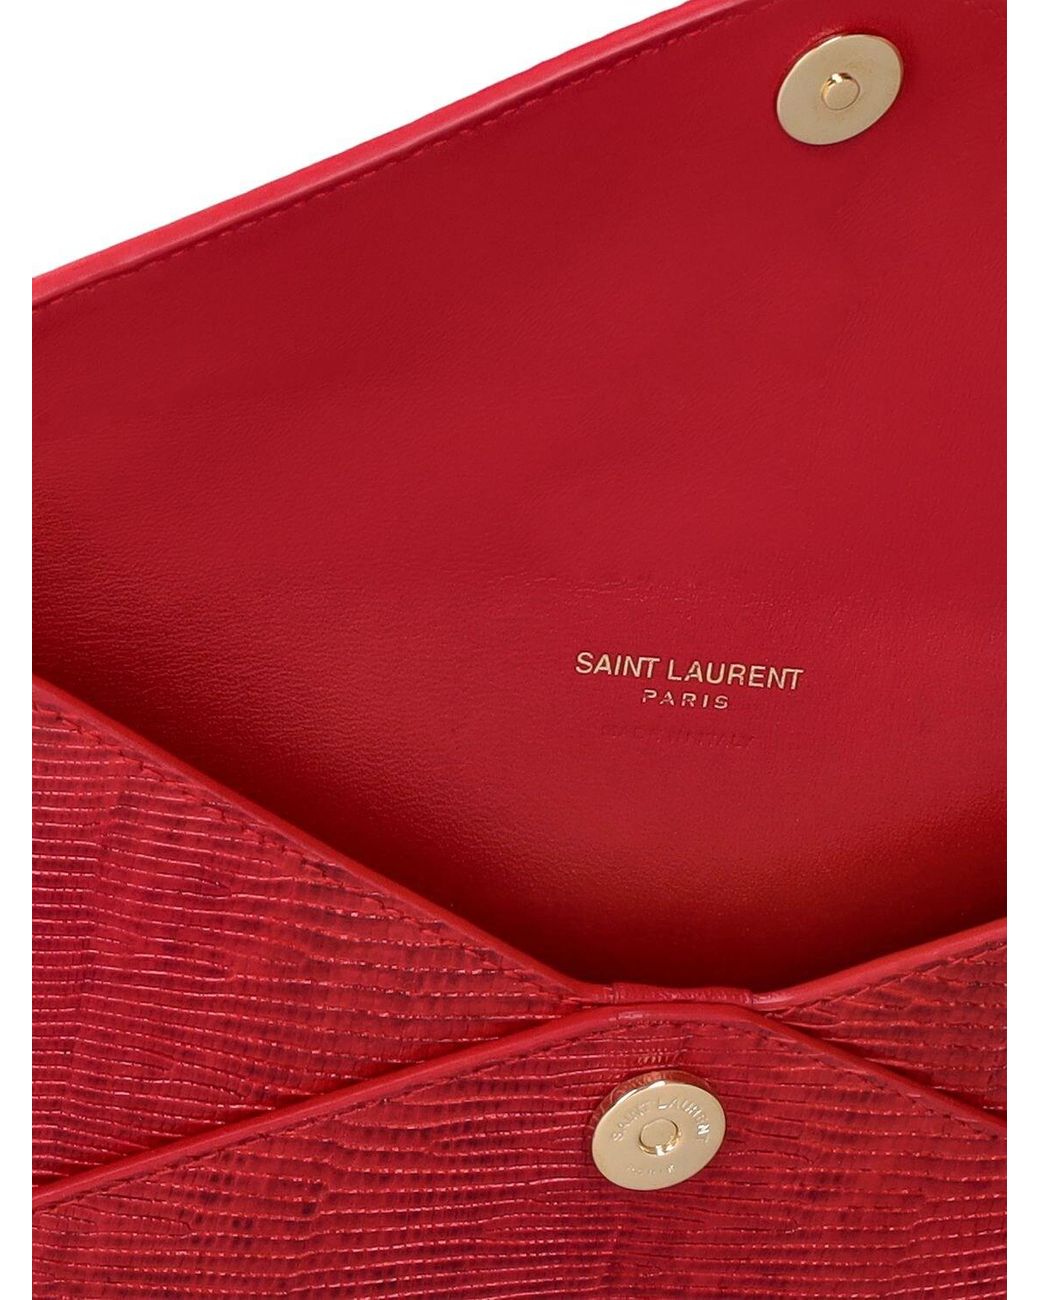 Saint Laurent Paloma Snake Embossed Leather Pouch in Red | Lyst Canada